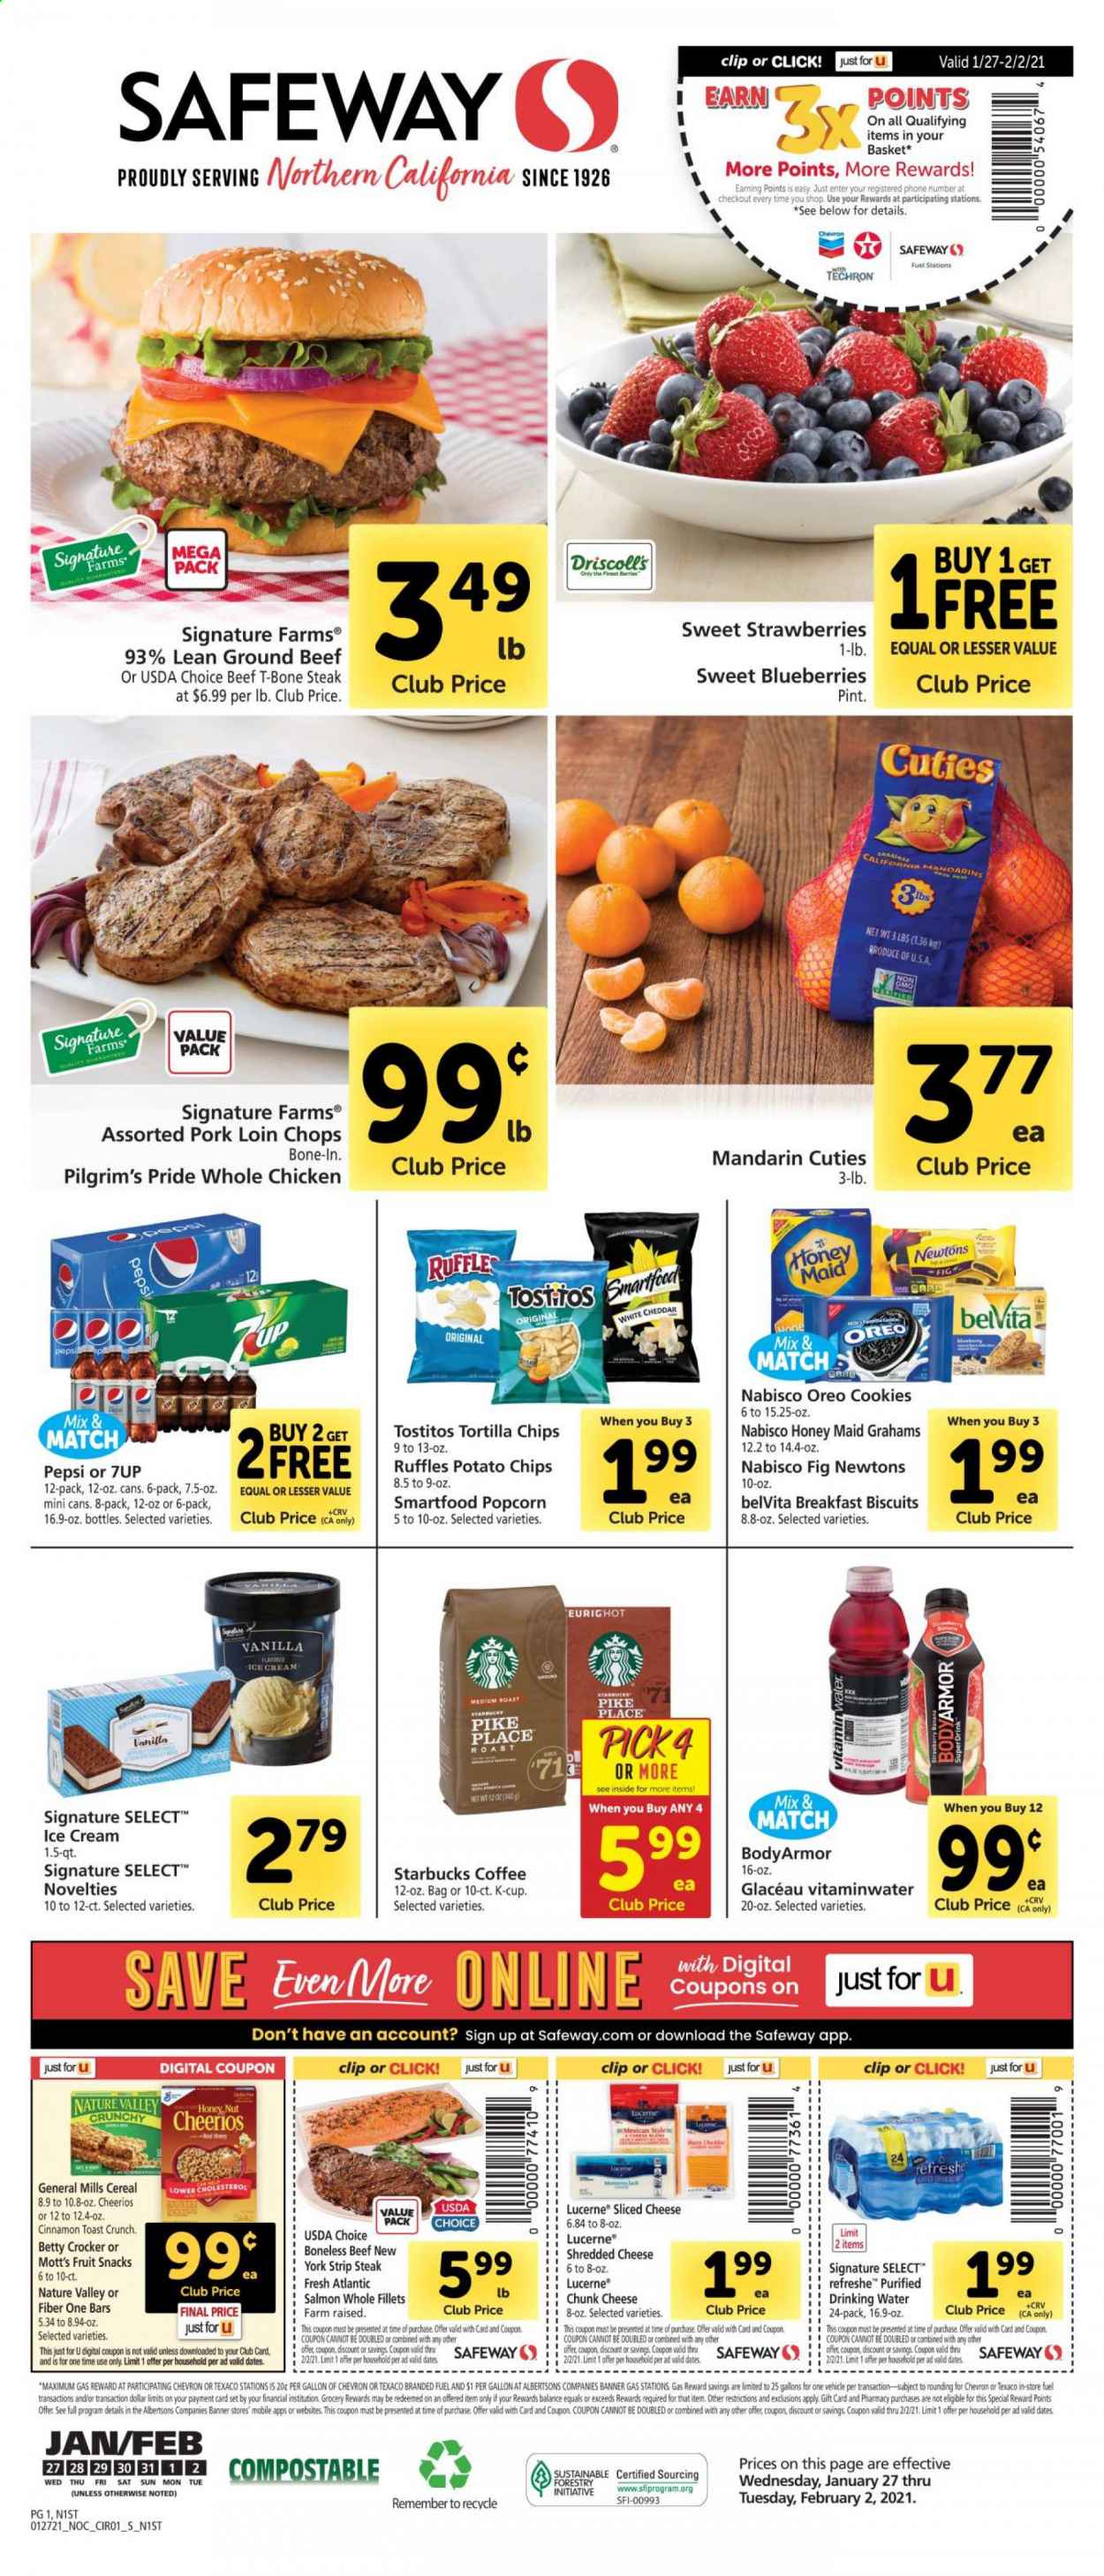 thumbnail - Safeway Flyer - 01/27/2021 - 02/02/2021 - Sales products - blueberries, toast bread, whole chicken, beef meat, ground beef, t-bone steak, steak, striploin steak, pork loin, pork meat, salmon, shredded cheese, sliced cheese, chunk cheese, Oreo, ice cream, strawberries, cookies, biscuit, fruit snack, tortilla chips, potato chips, chips, Smartfood, popcorn, Ruffles, Tostitos, mandarines, cereals, Cheerios, belVita, Honey Maid, Nature Valley, Fiber One, cinnamon, dried dates, Pepsi, 7UP, Mott's, coffee, Starbucks, coffee capsules, K-Cups. Page 1.